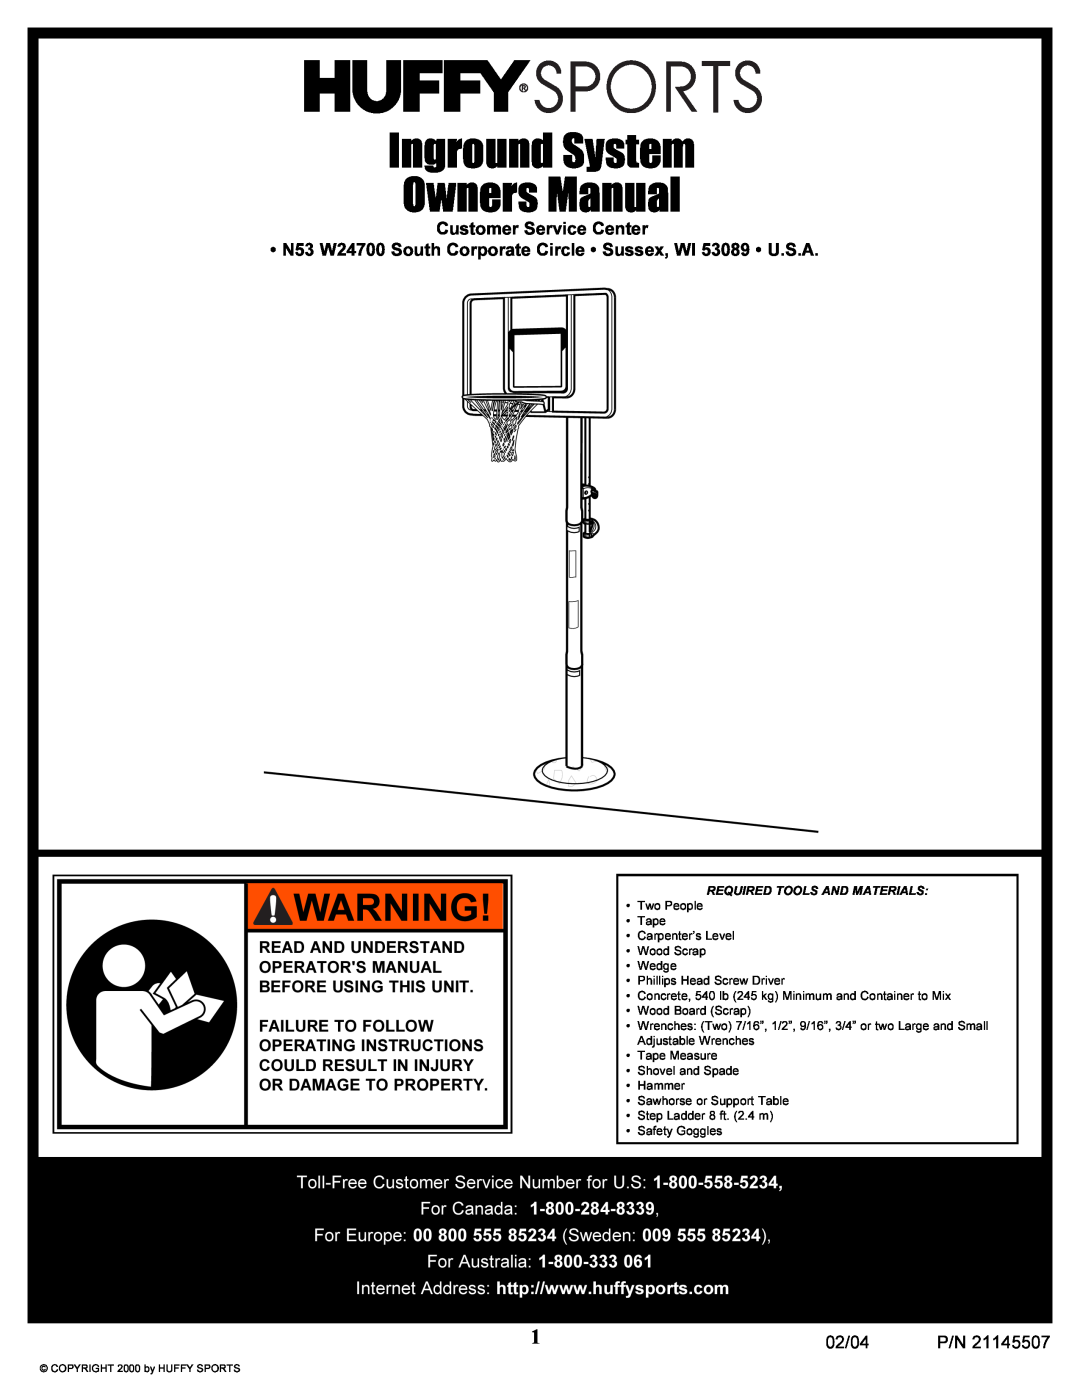 Huffy Sports Basketball Systems manual Inground System Owners Manual, Customer Service Center, 02/04 